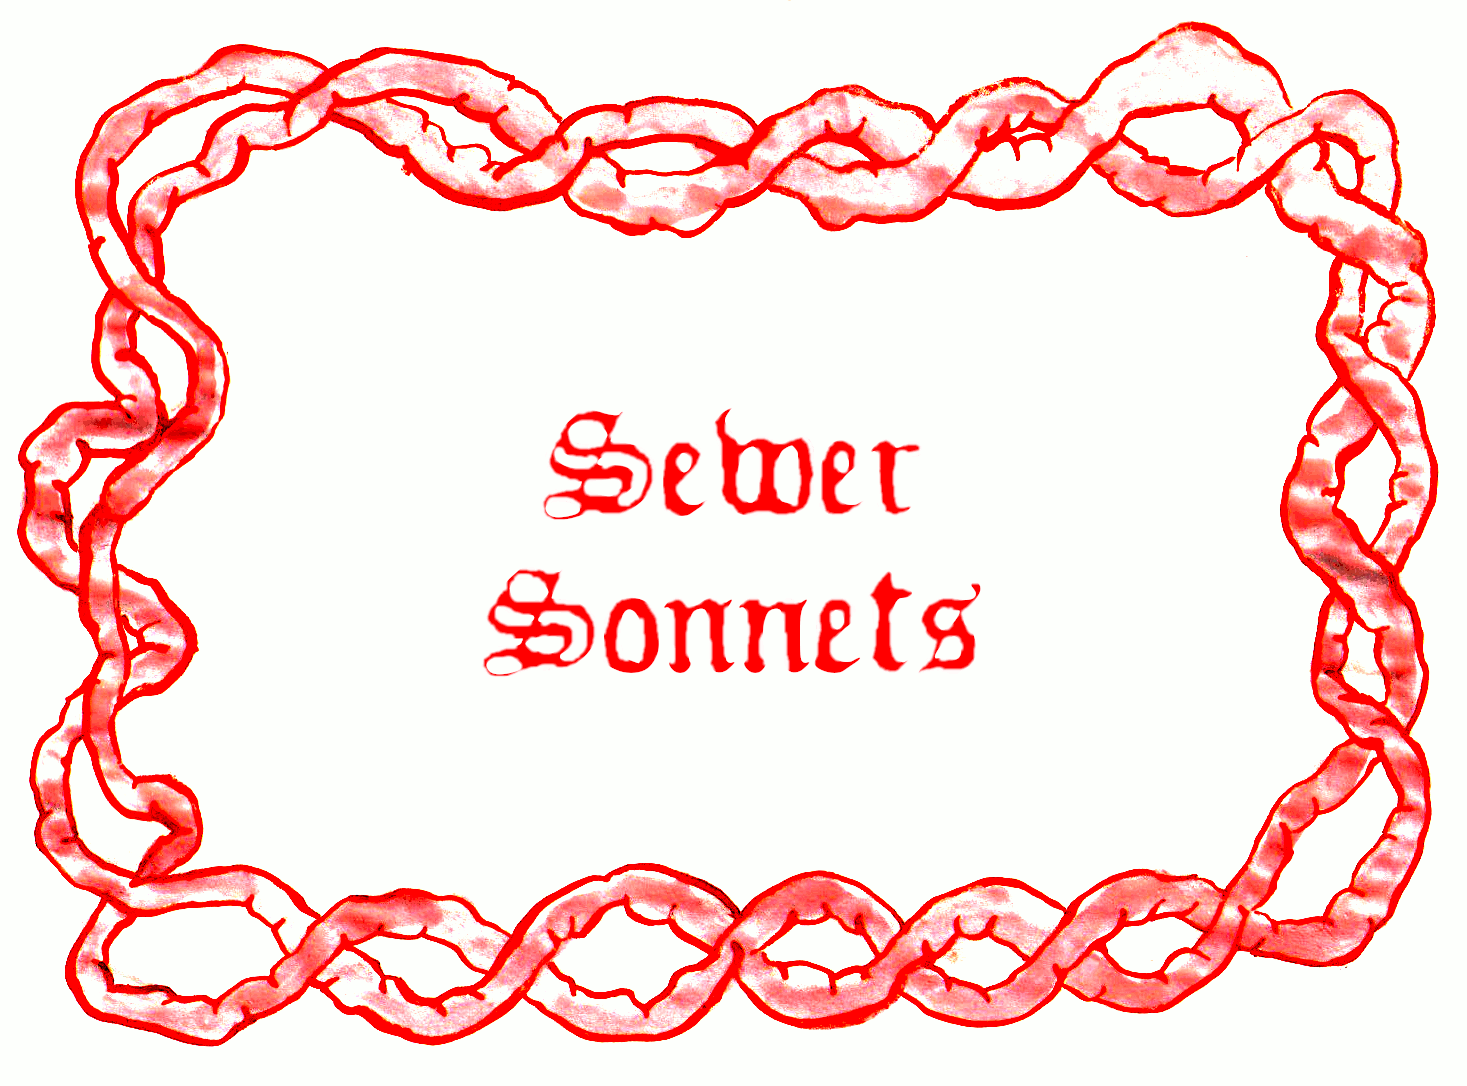 Sewer Sonnets